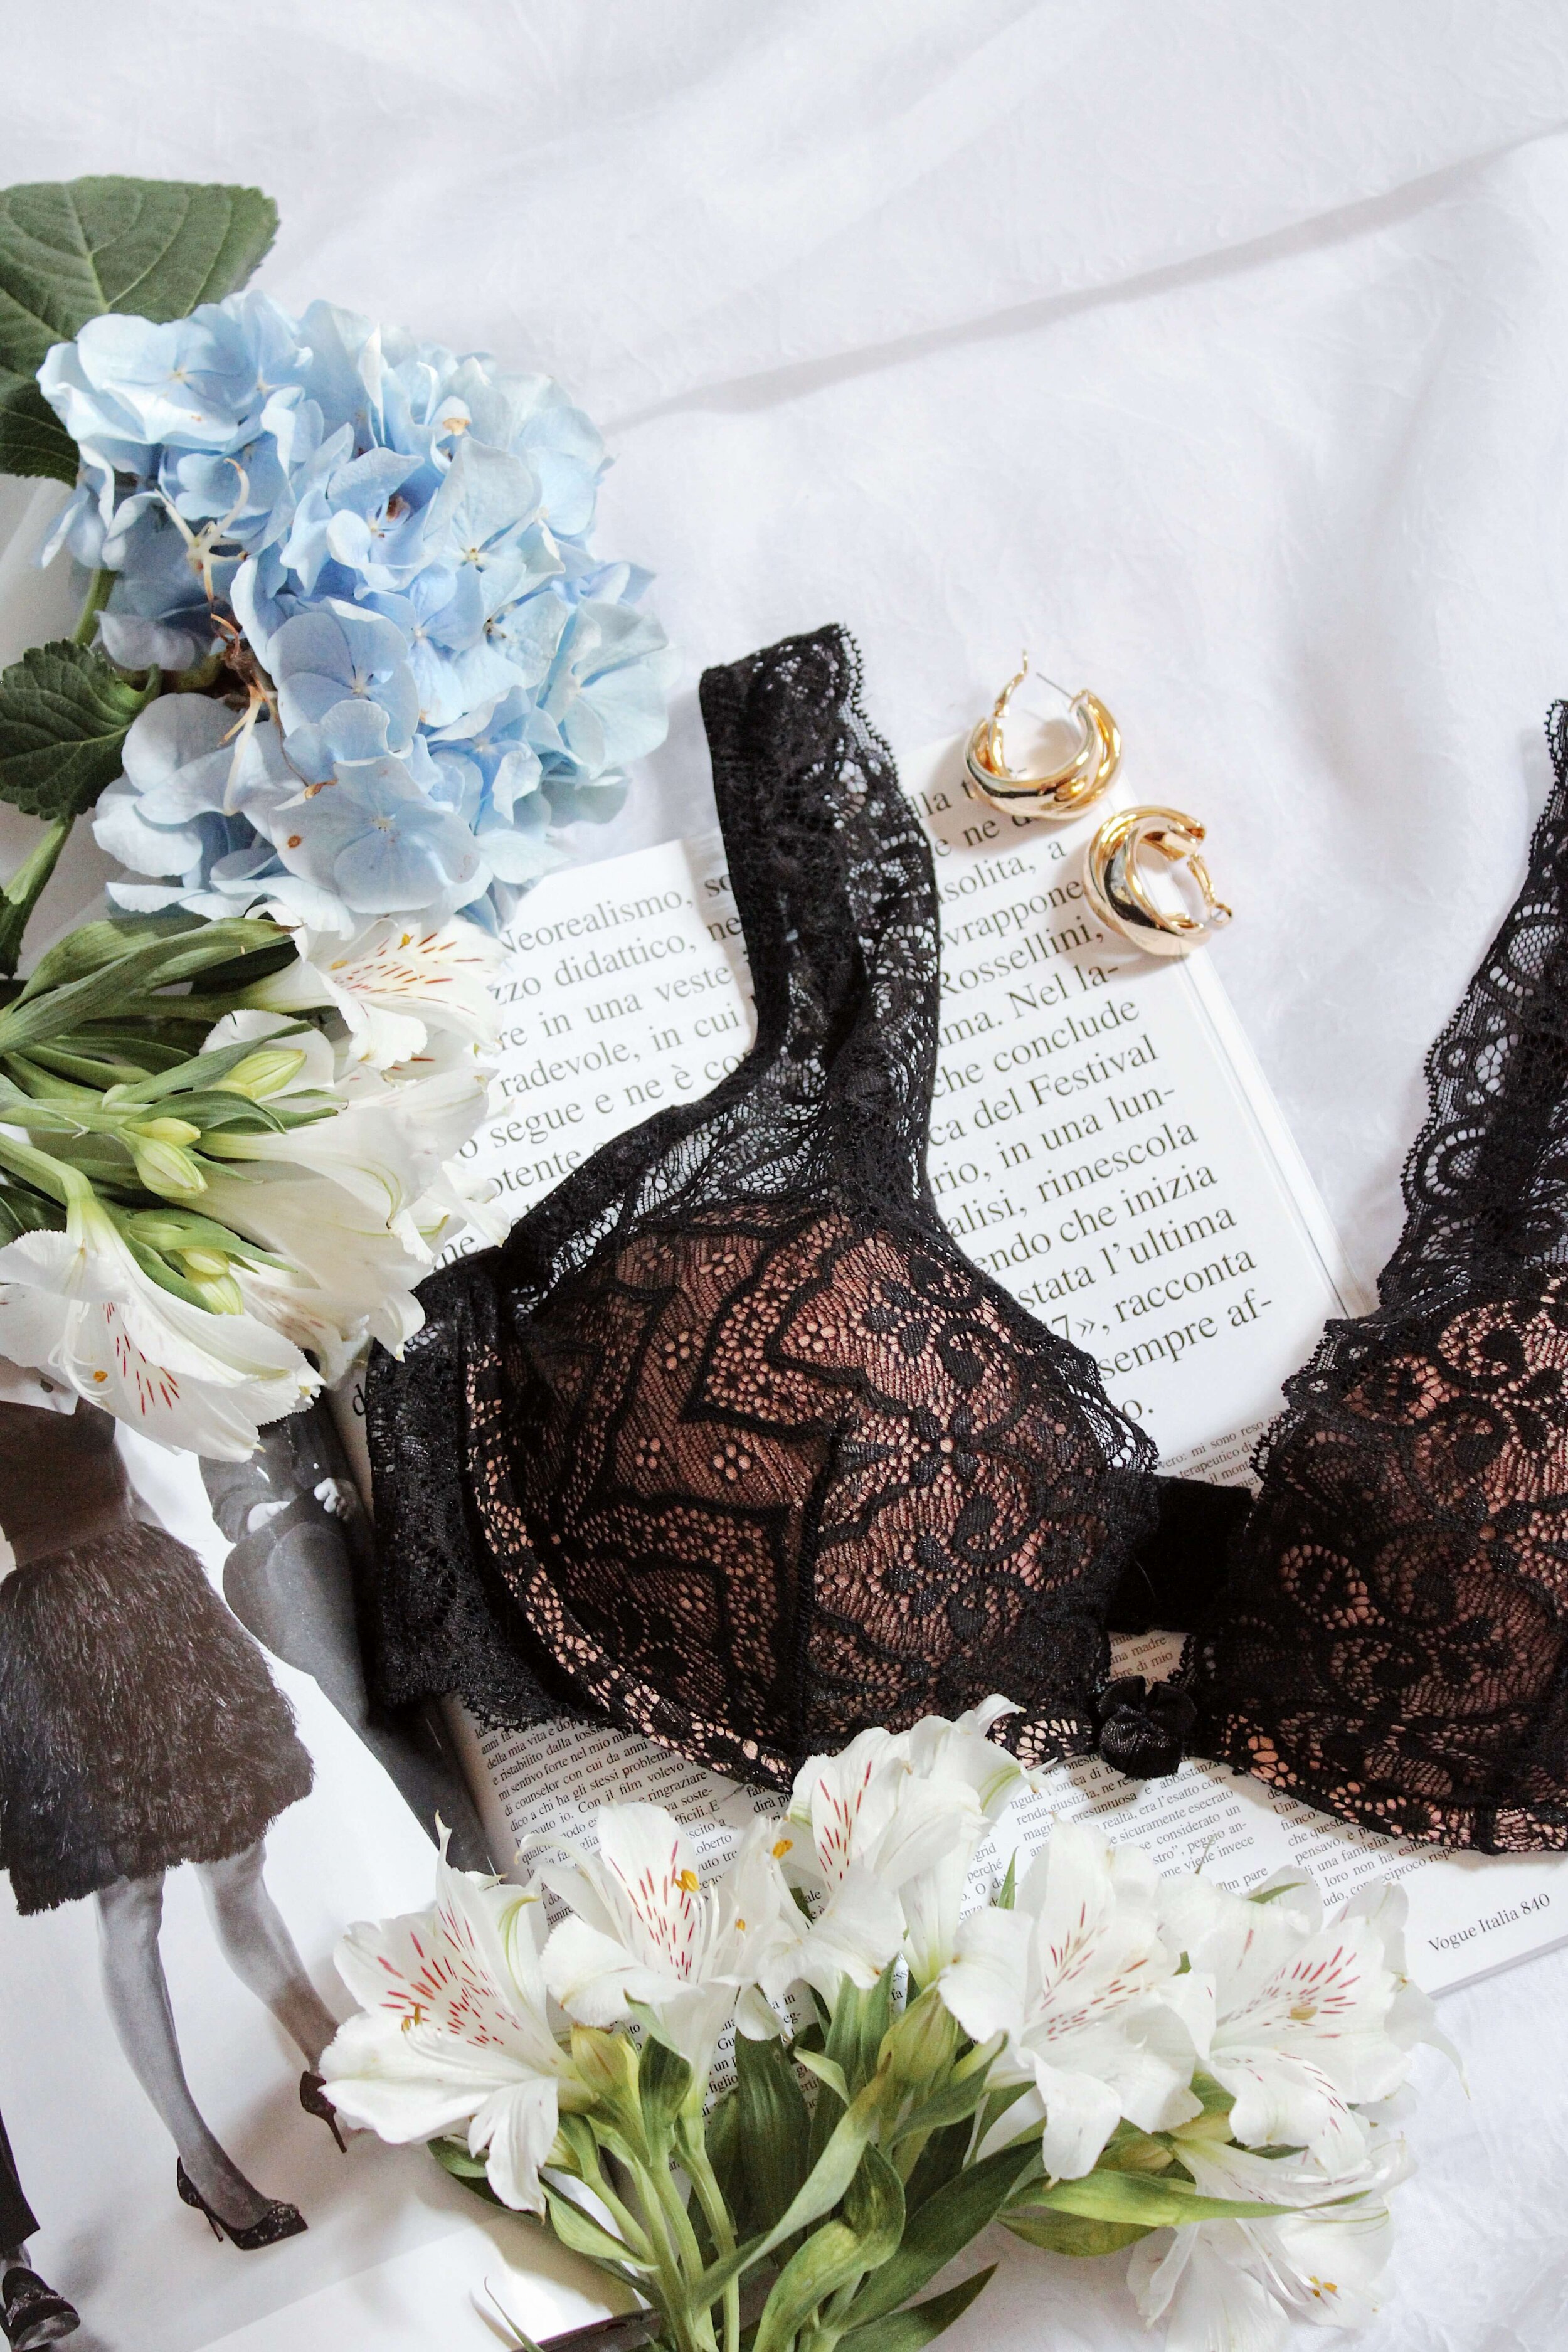 https://images.squarespace-cdn.com/content/v1/575ef1b97da24fd757acb056/1611595386046-TQDPEAUFYH8CRPX6CHT3/Flatlay+of+lacy+bra+with+gold+earrings%2C+a+book+and+flowers